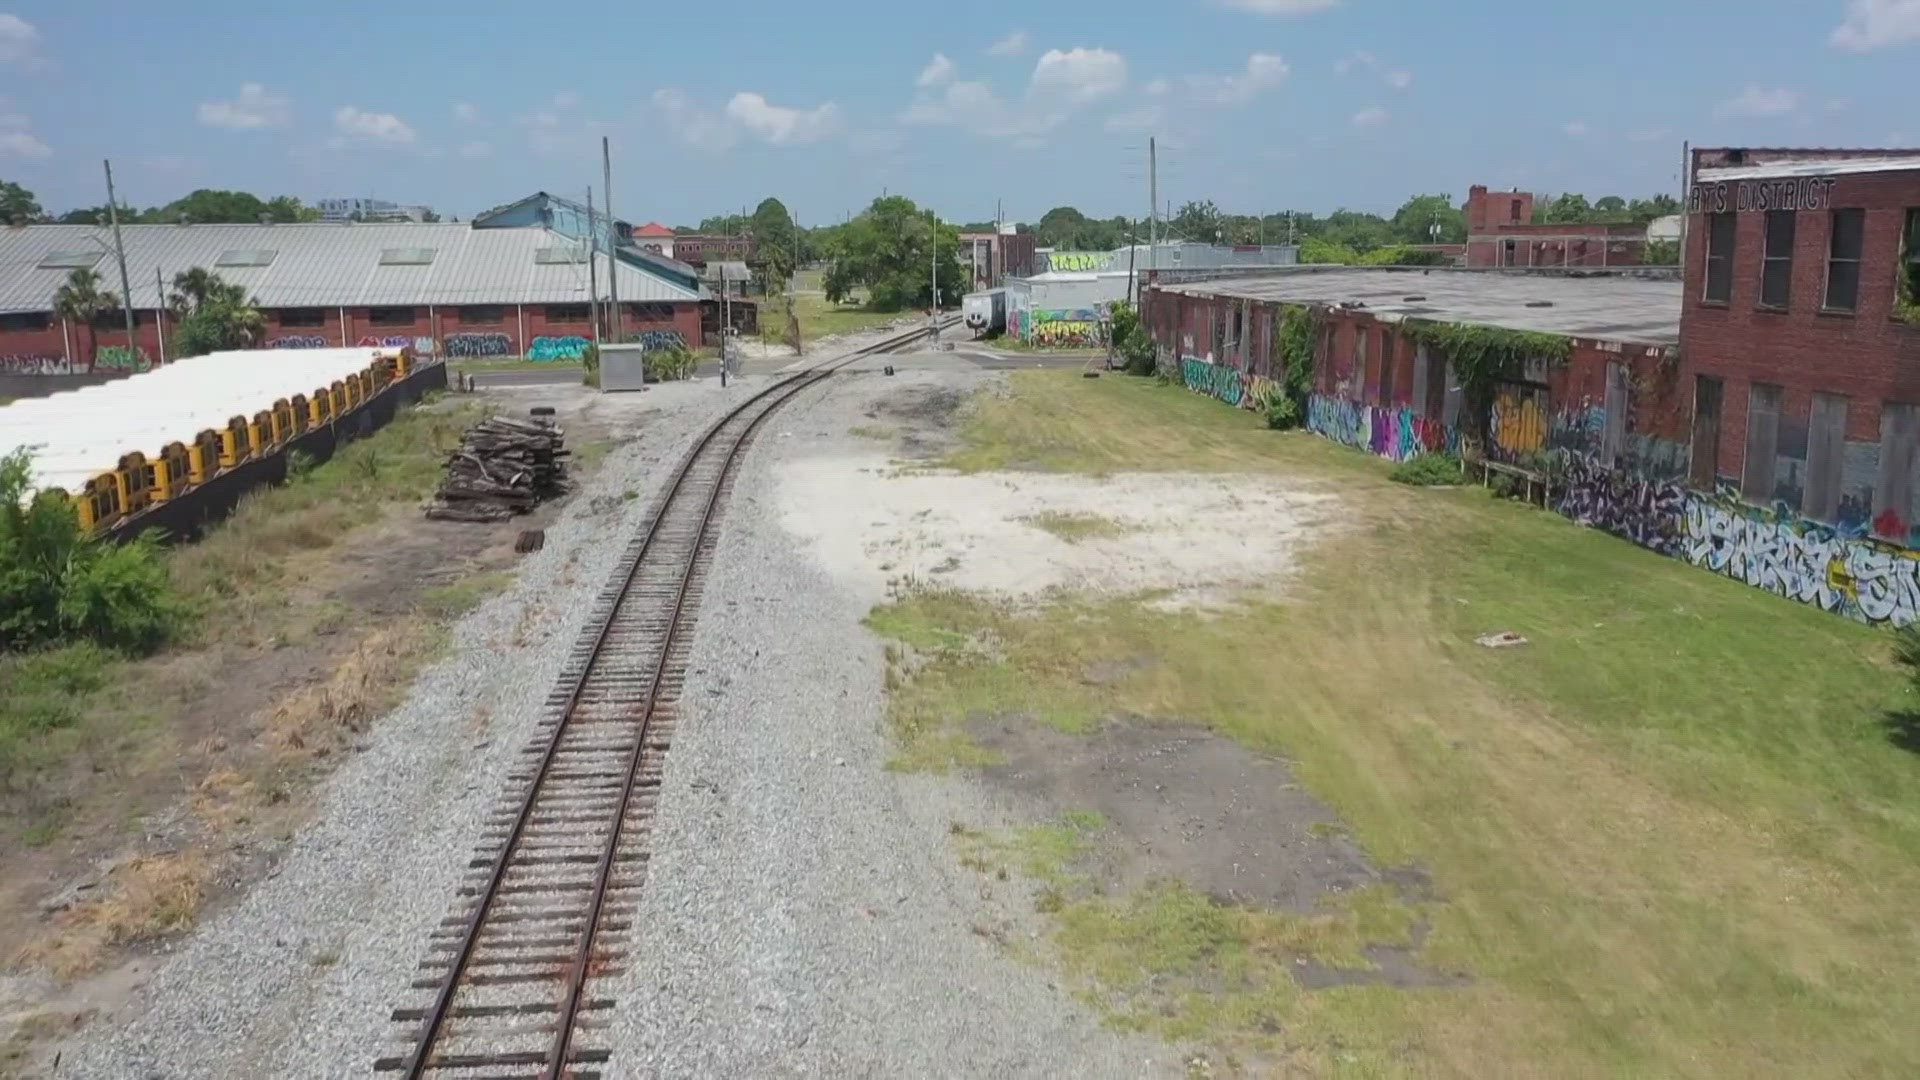 A seemingly once forgotten part of town is set to be transformed into an arts district in Jacksonville.